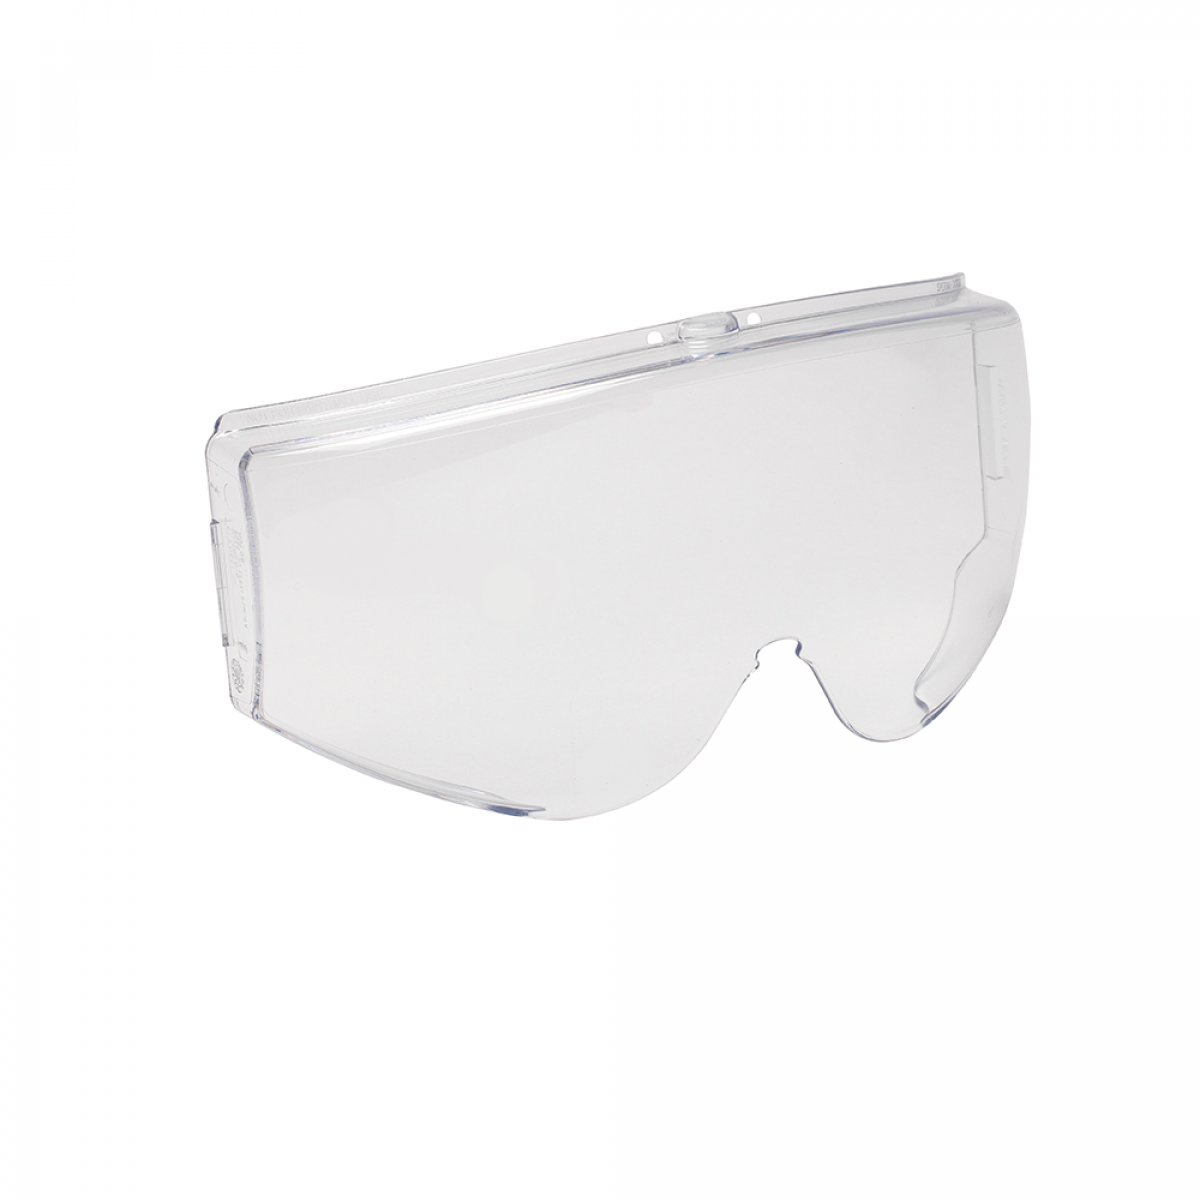 Polycarbonate Scratch-resistant Lens for Honeywell Maxx Pro